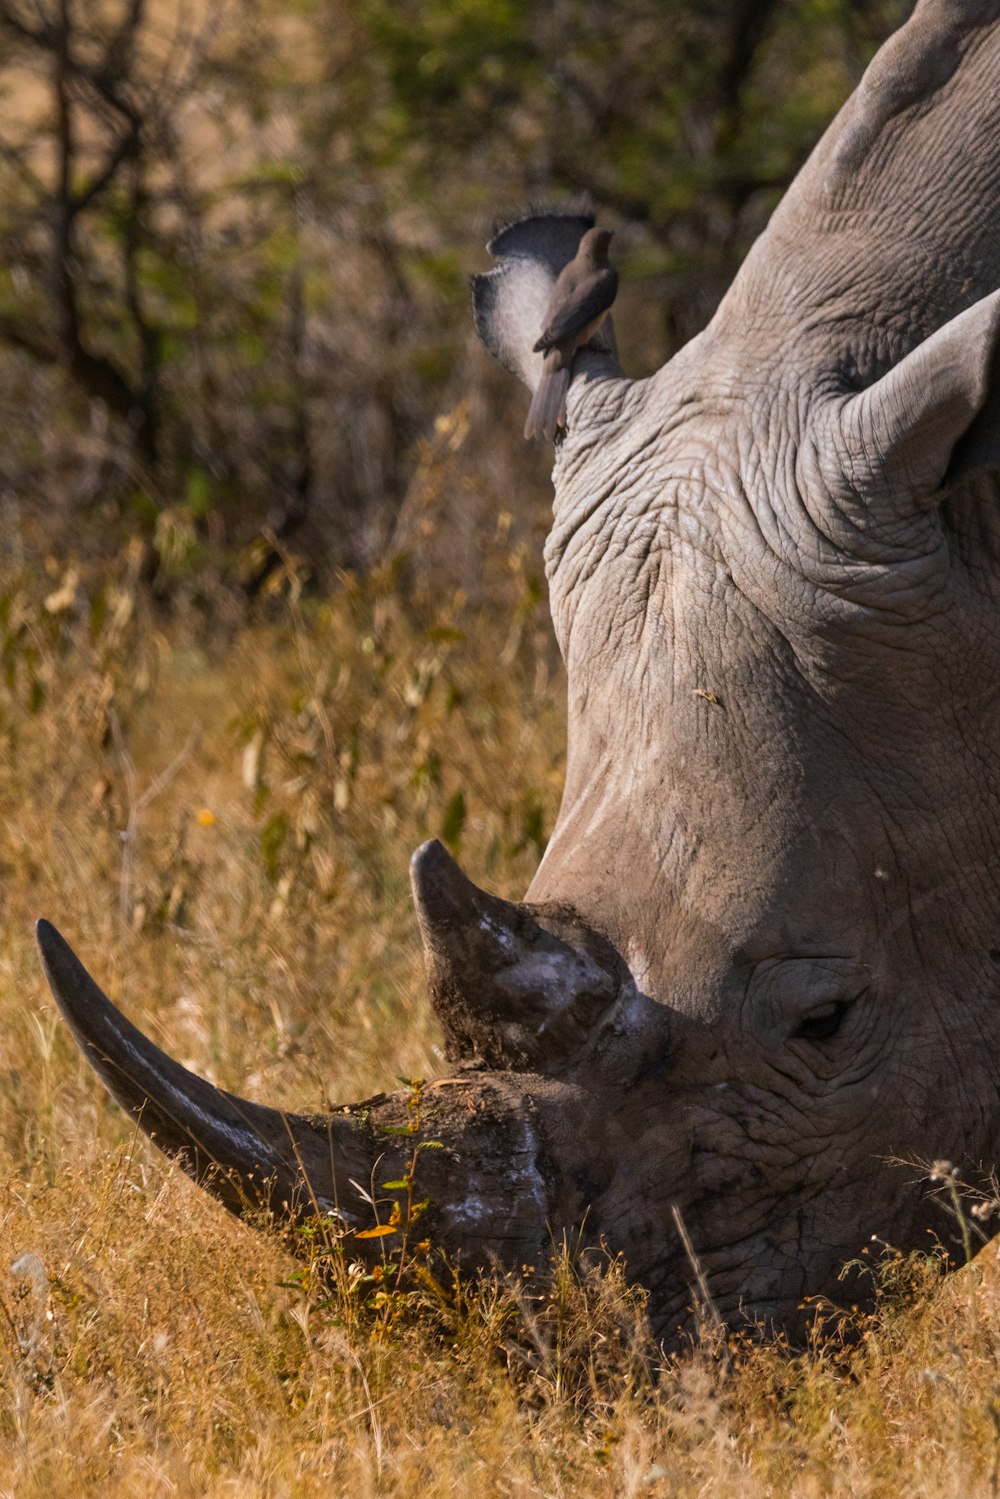 a close up of a rhinoceros grazing in a field